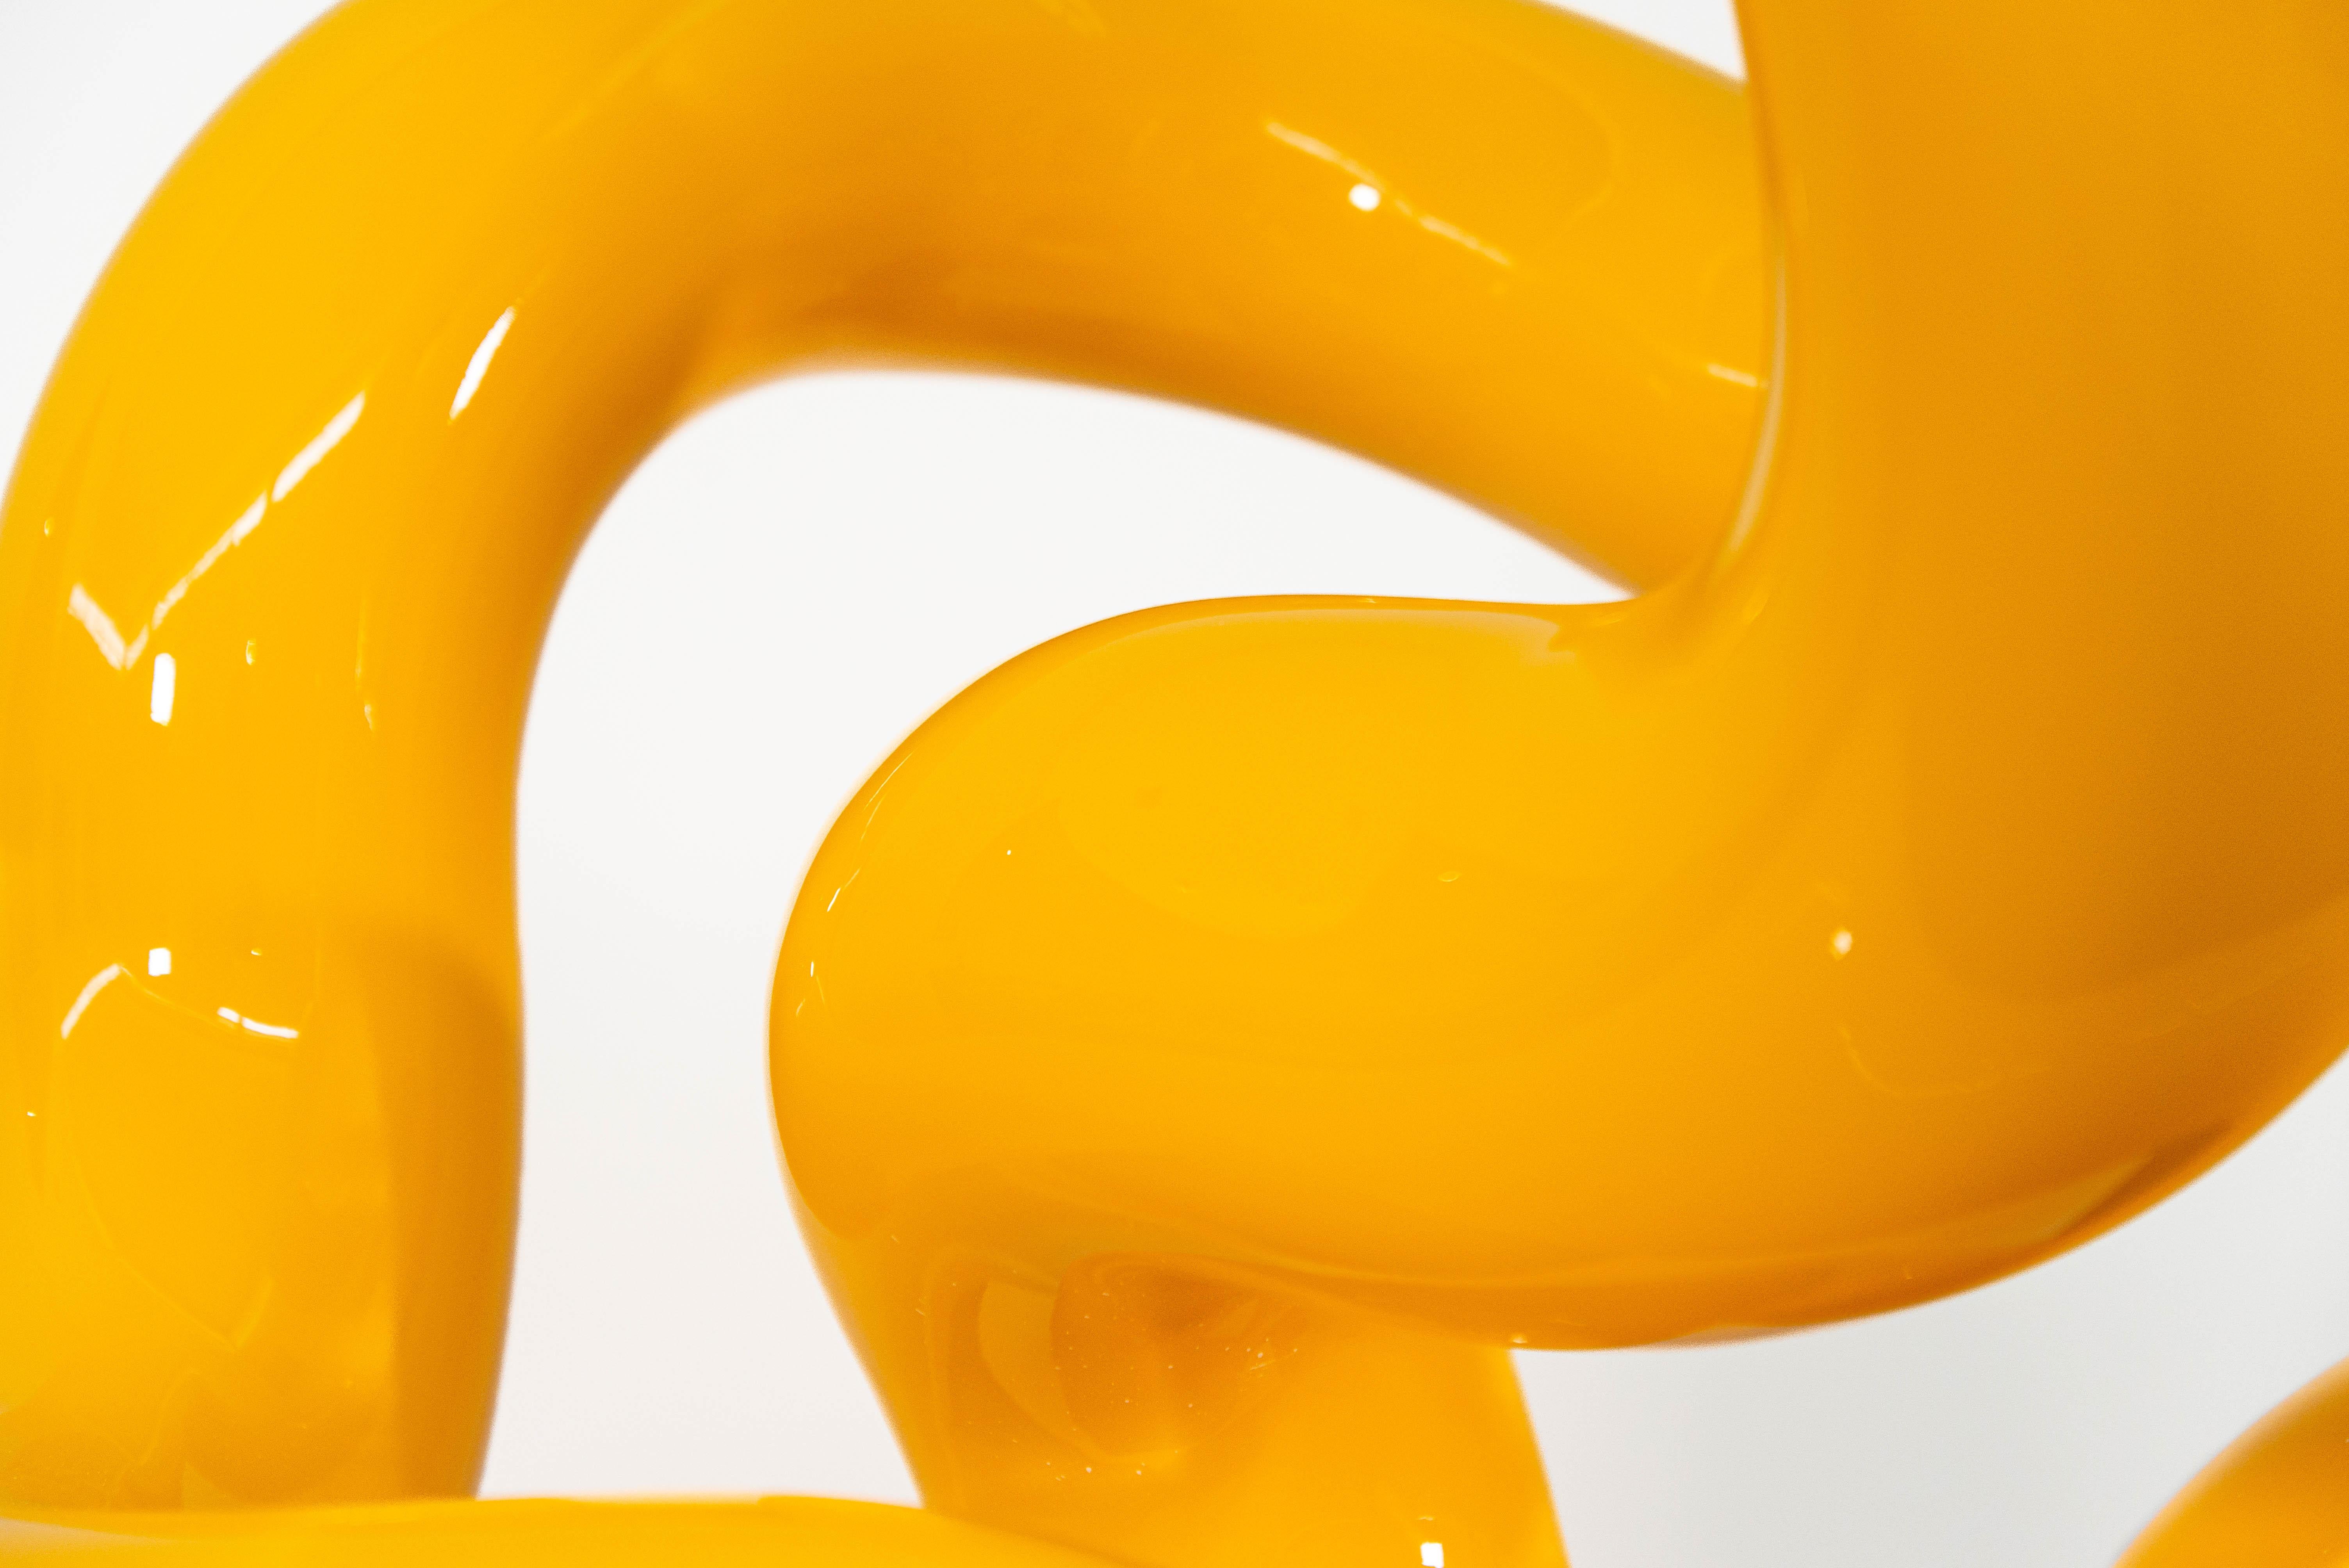 The shiny bright yellow colour of this engaging sculpture accentuates its elegant form.
This is Alexander Caldwell. The Calgary based artist is known for his playful, minimalist pieces forged from stainless steel and coated in a high gloss paint.